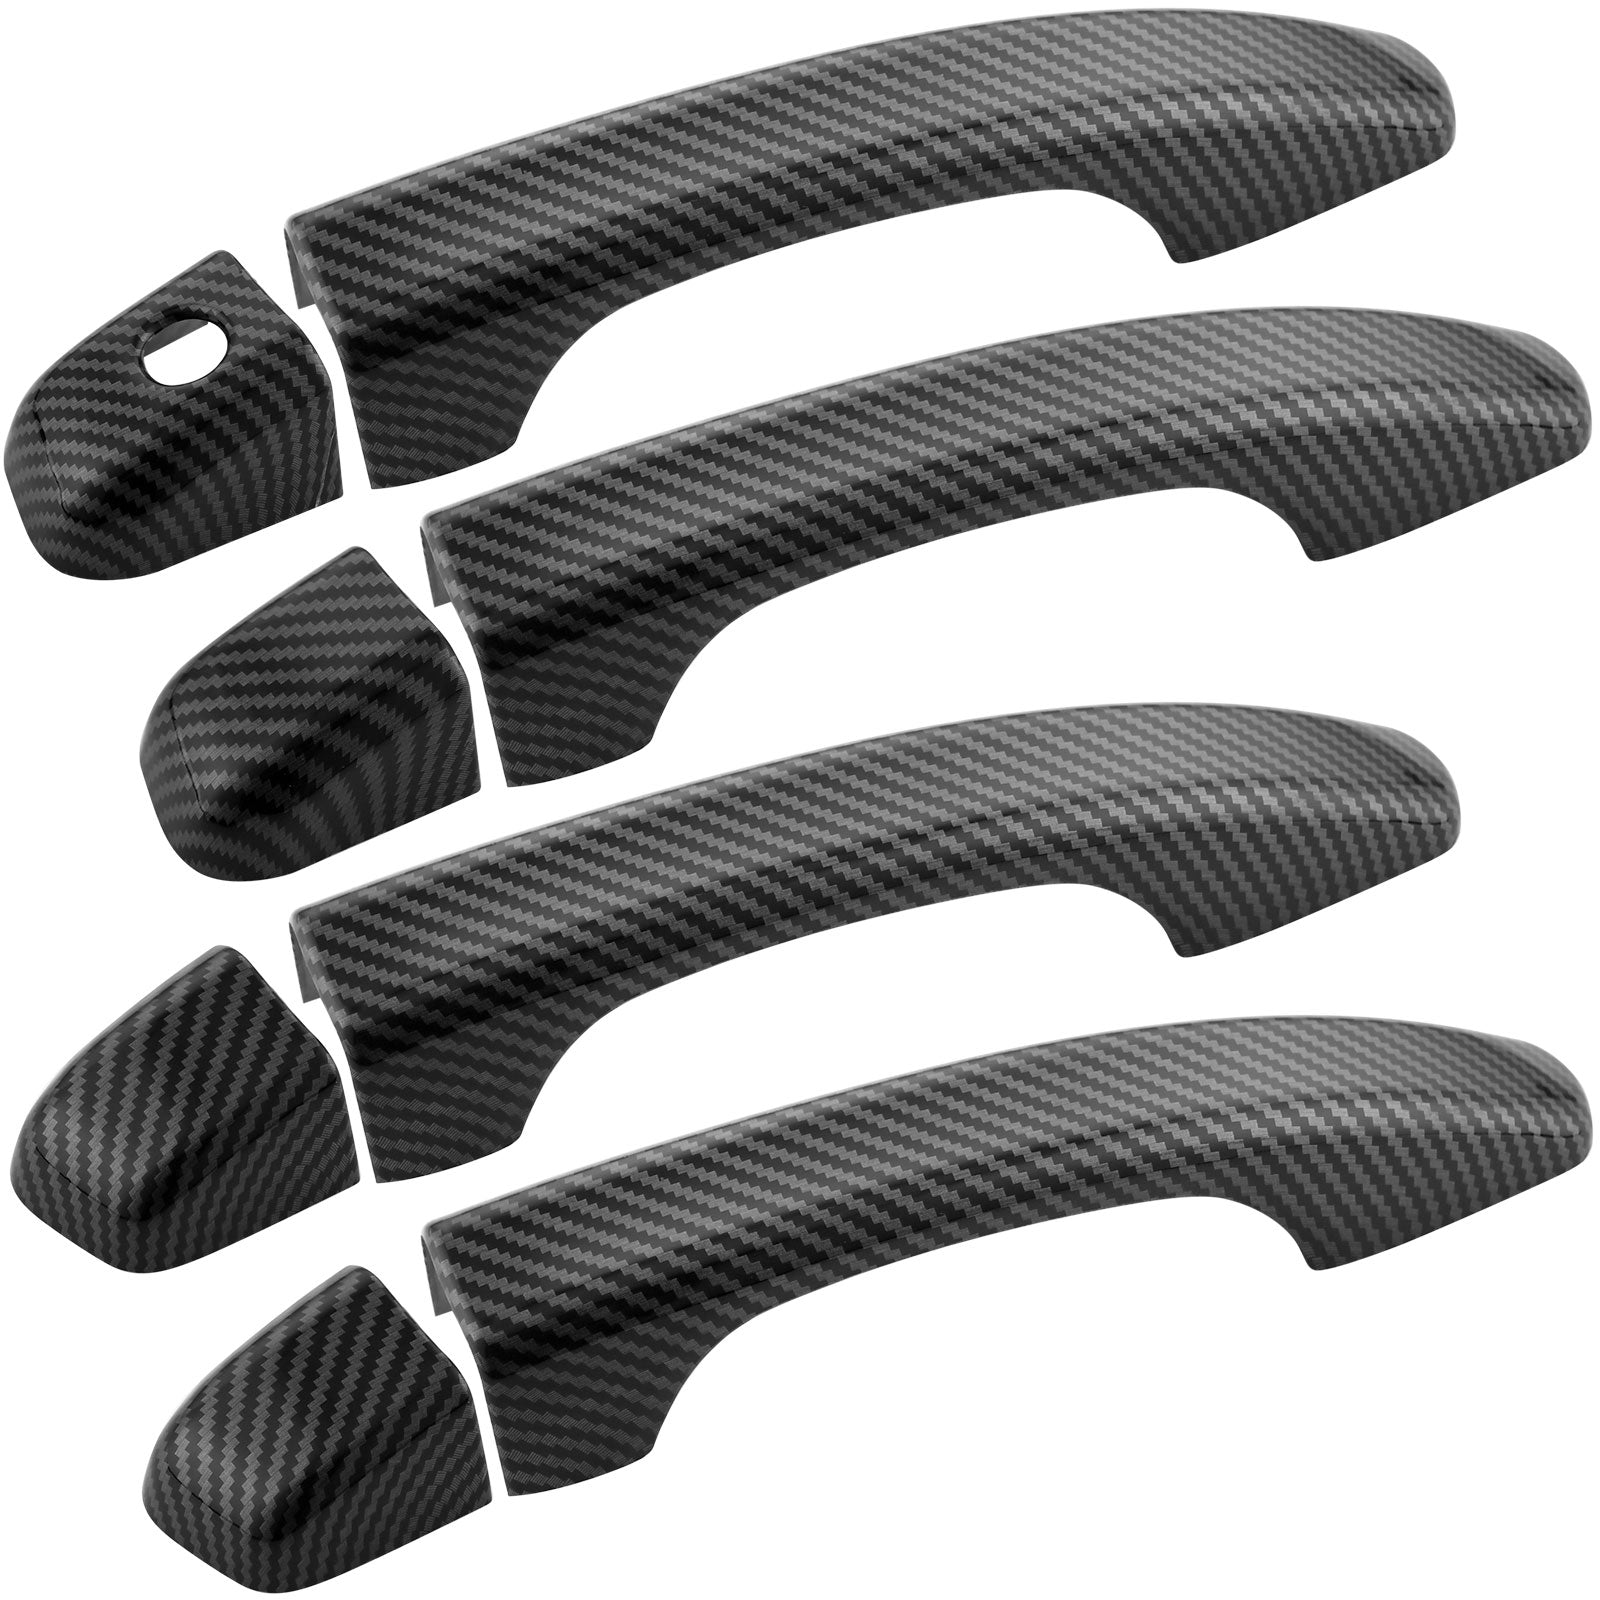 4PCS Exterior Door Handle Fits for Honda Accord 2018 2019 2020 2021 Outer Outside Car Door Handle (Carbon Fiber Style ) MotorbyMotor